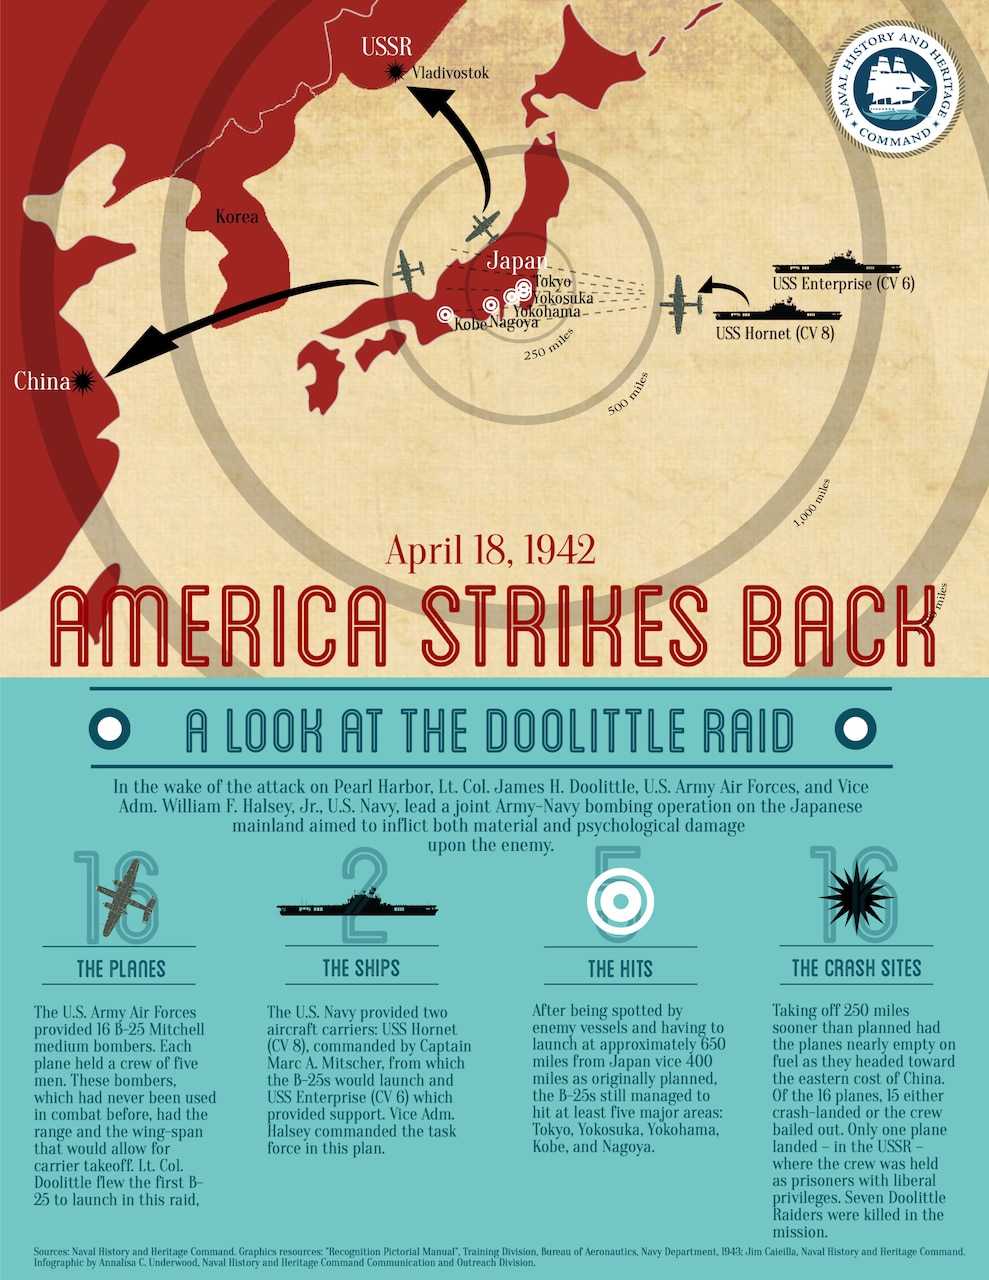 This infographic shares the history of the Doolittle Raid – how America struck back after Pearl Harbor.